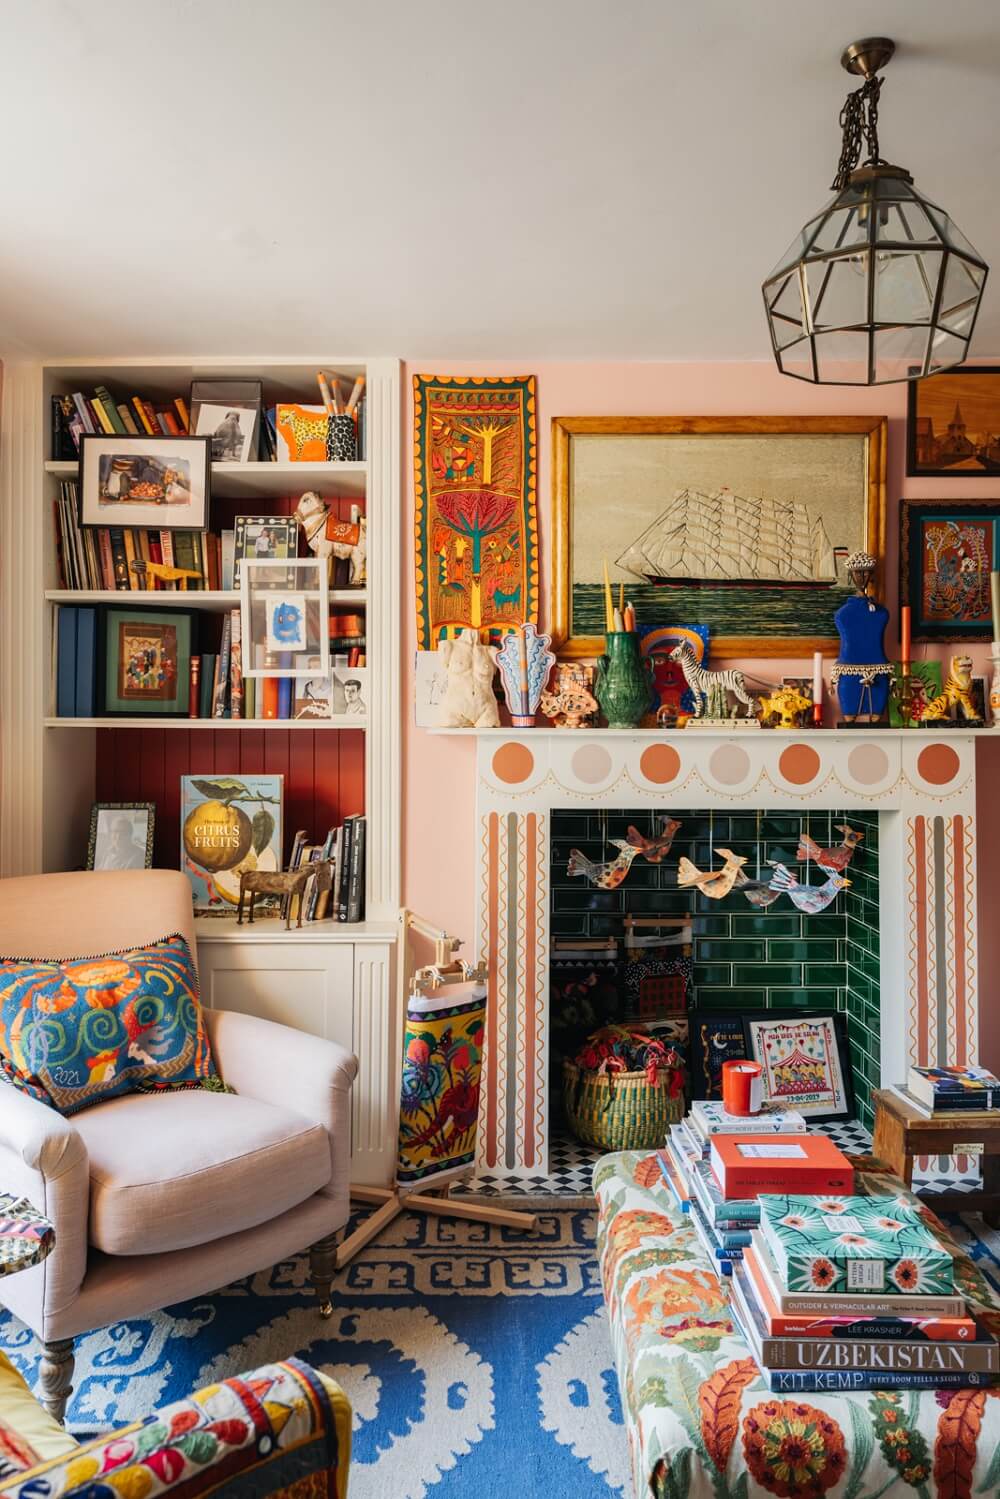 A Playful Maximalist Home in London